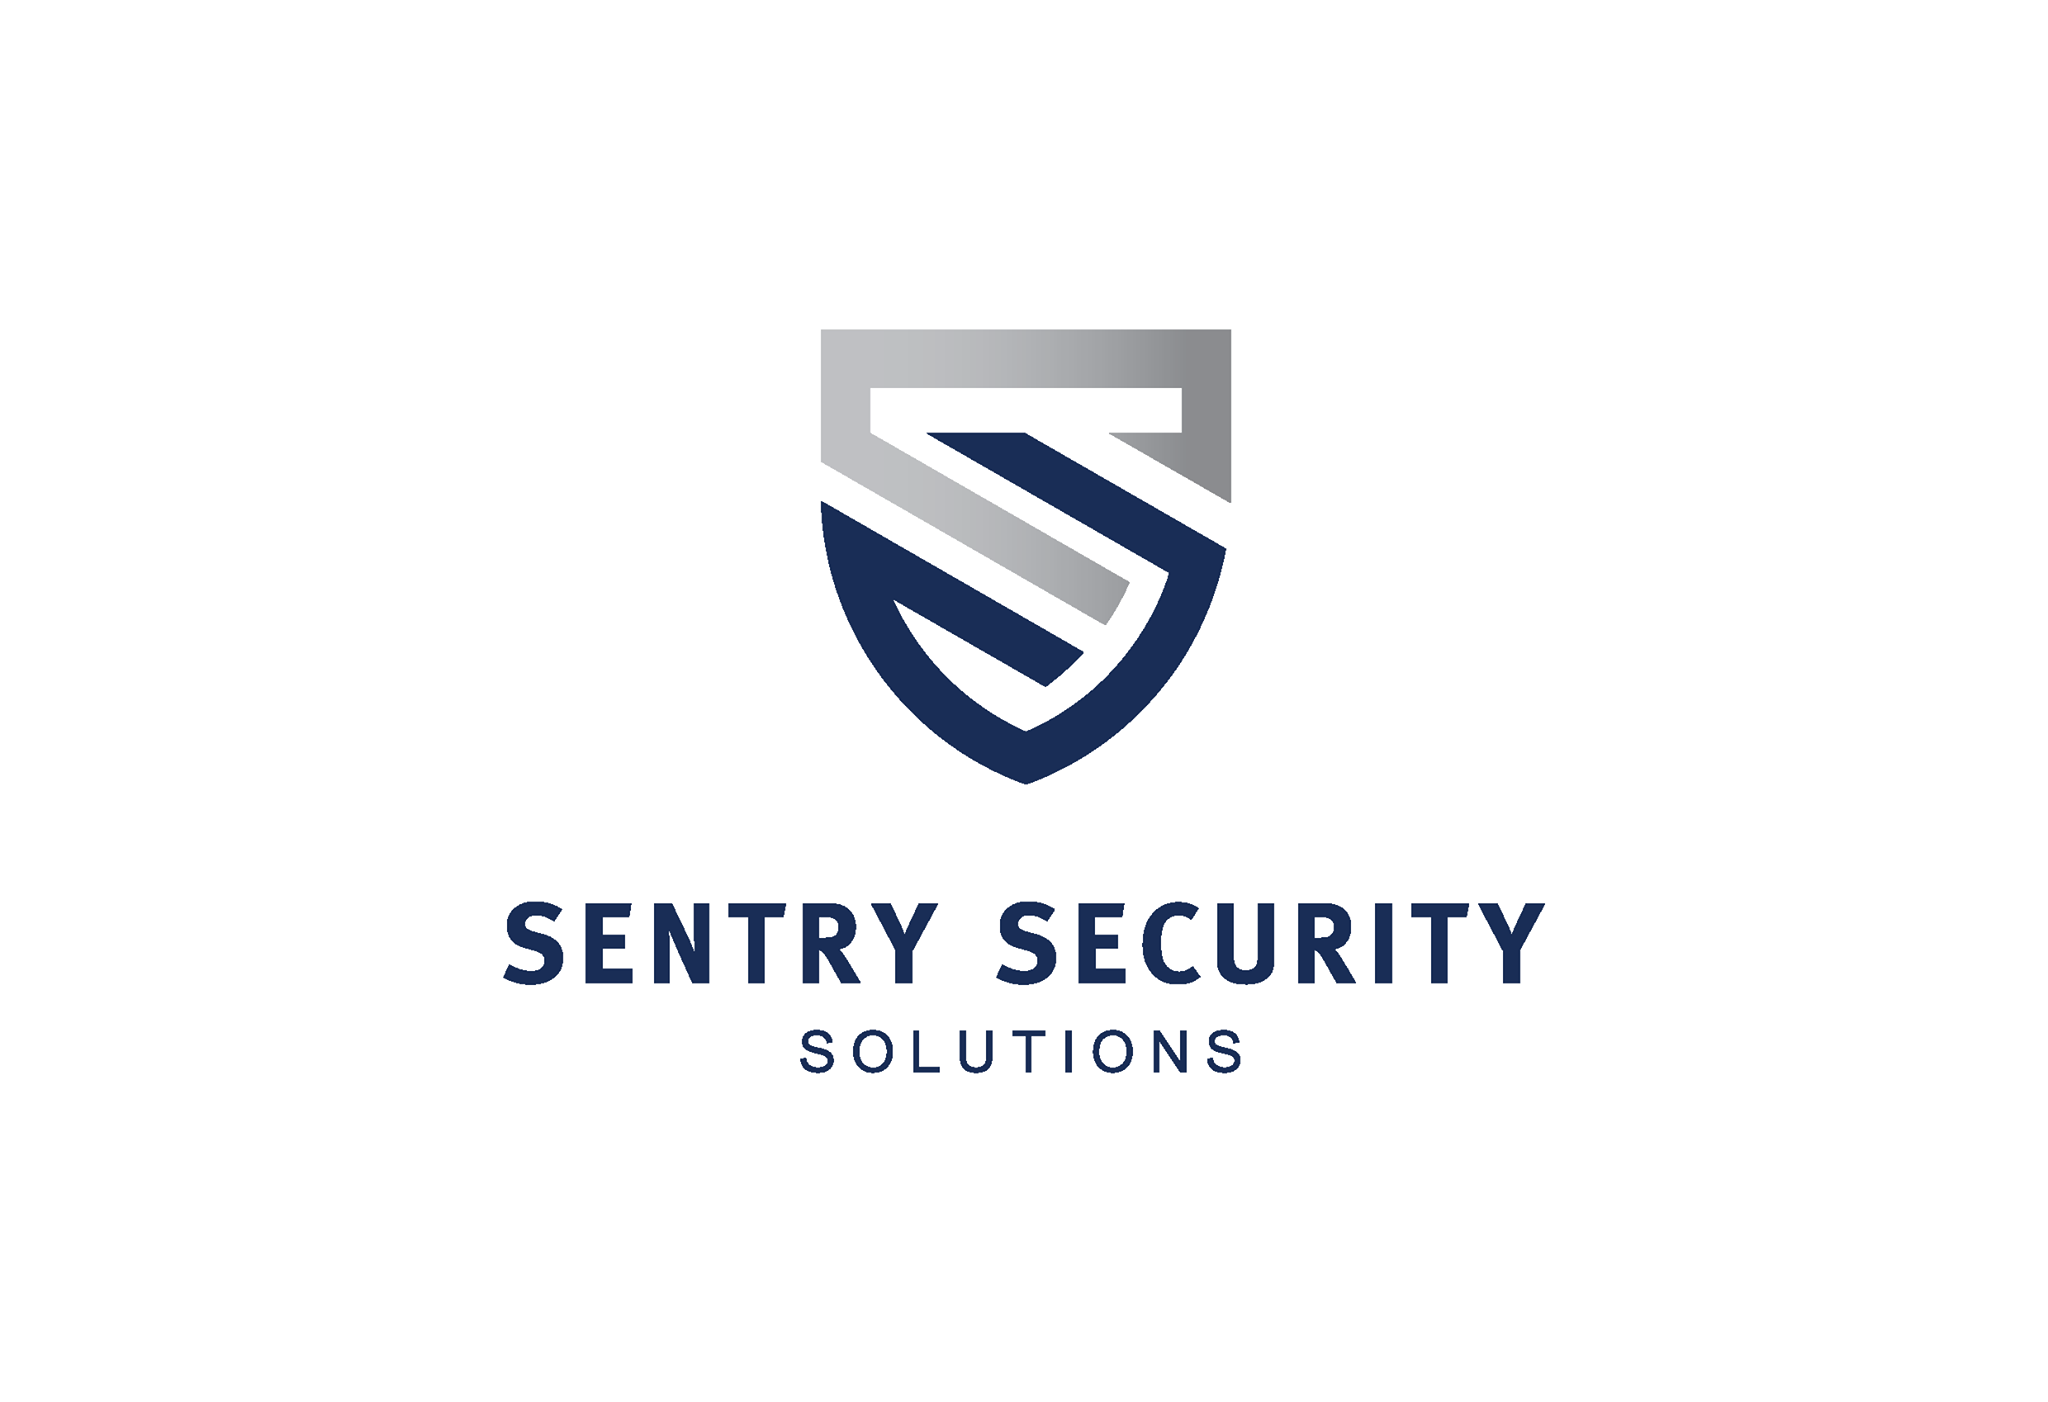 CCTV Monitoring & Video Surveillance Systems - Sentry Security Solutions